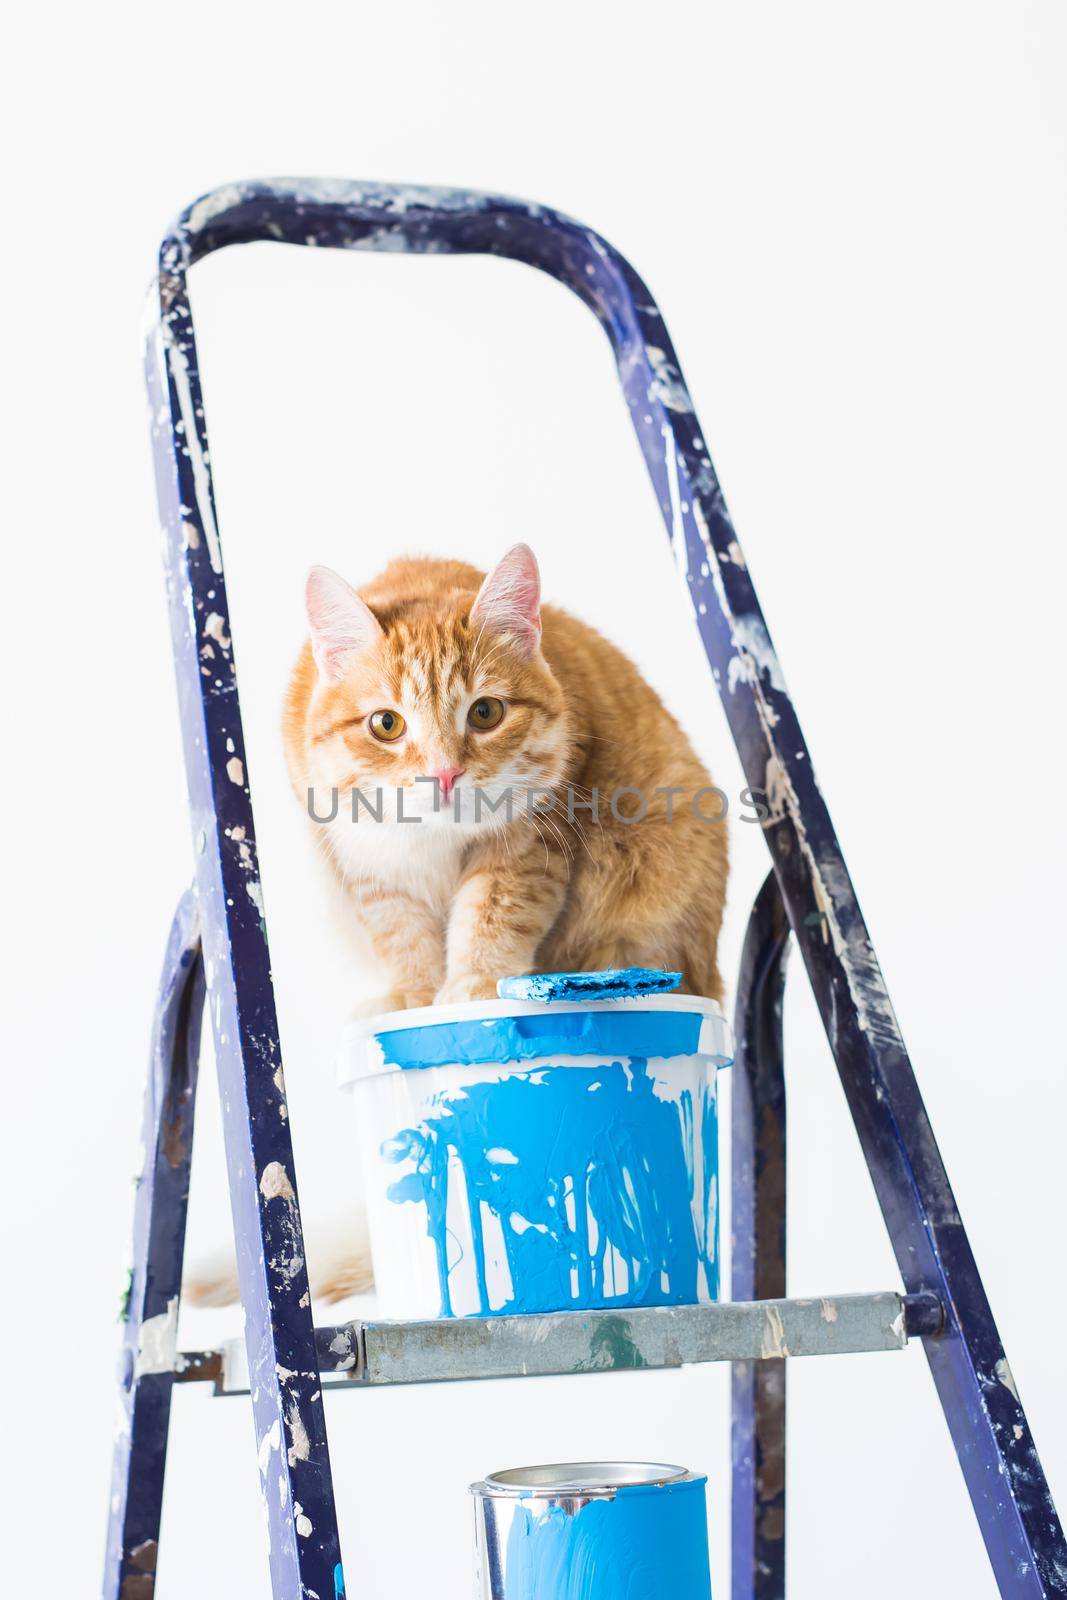 Repair, painting the walls, the cat sits on the stepladder. Funny picture by Satura86